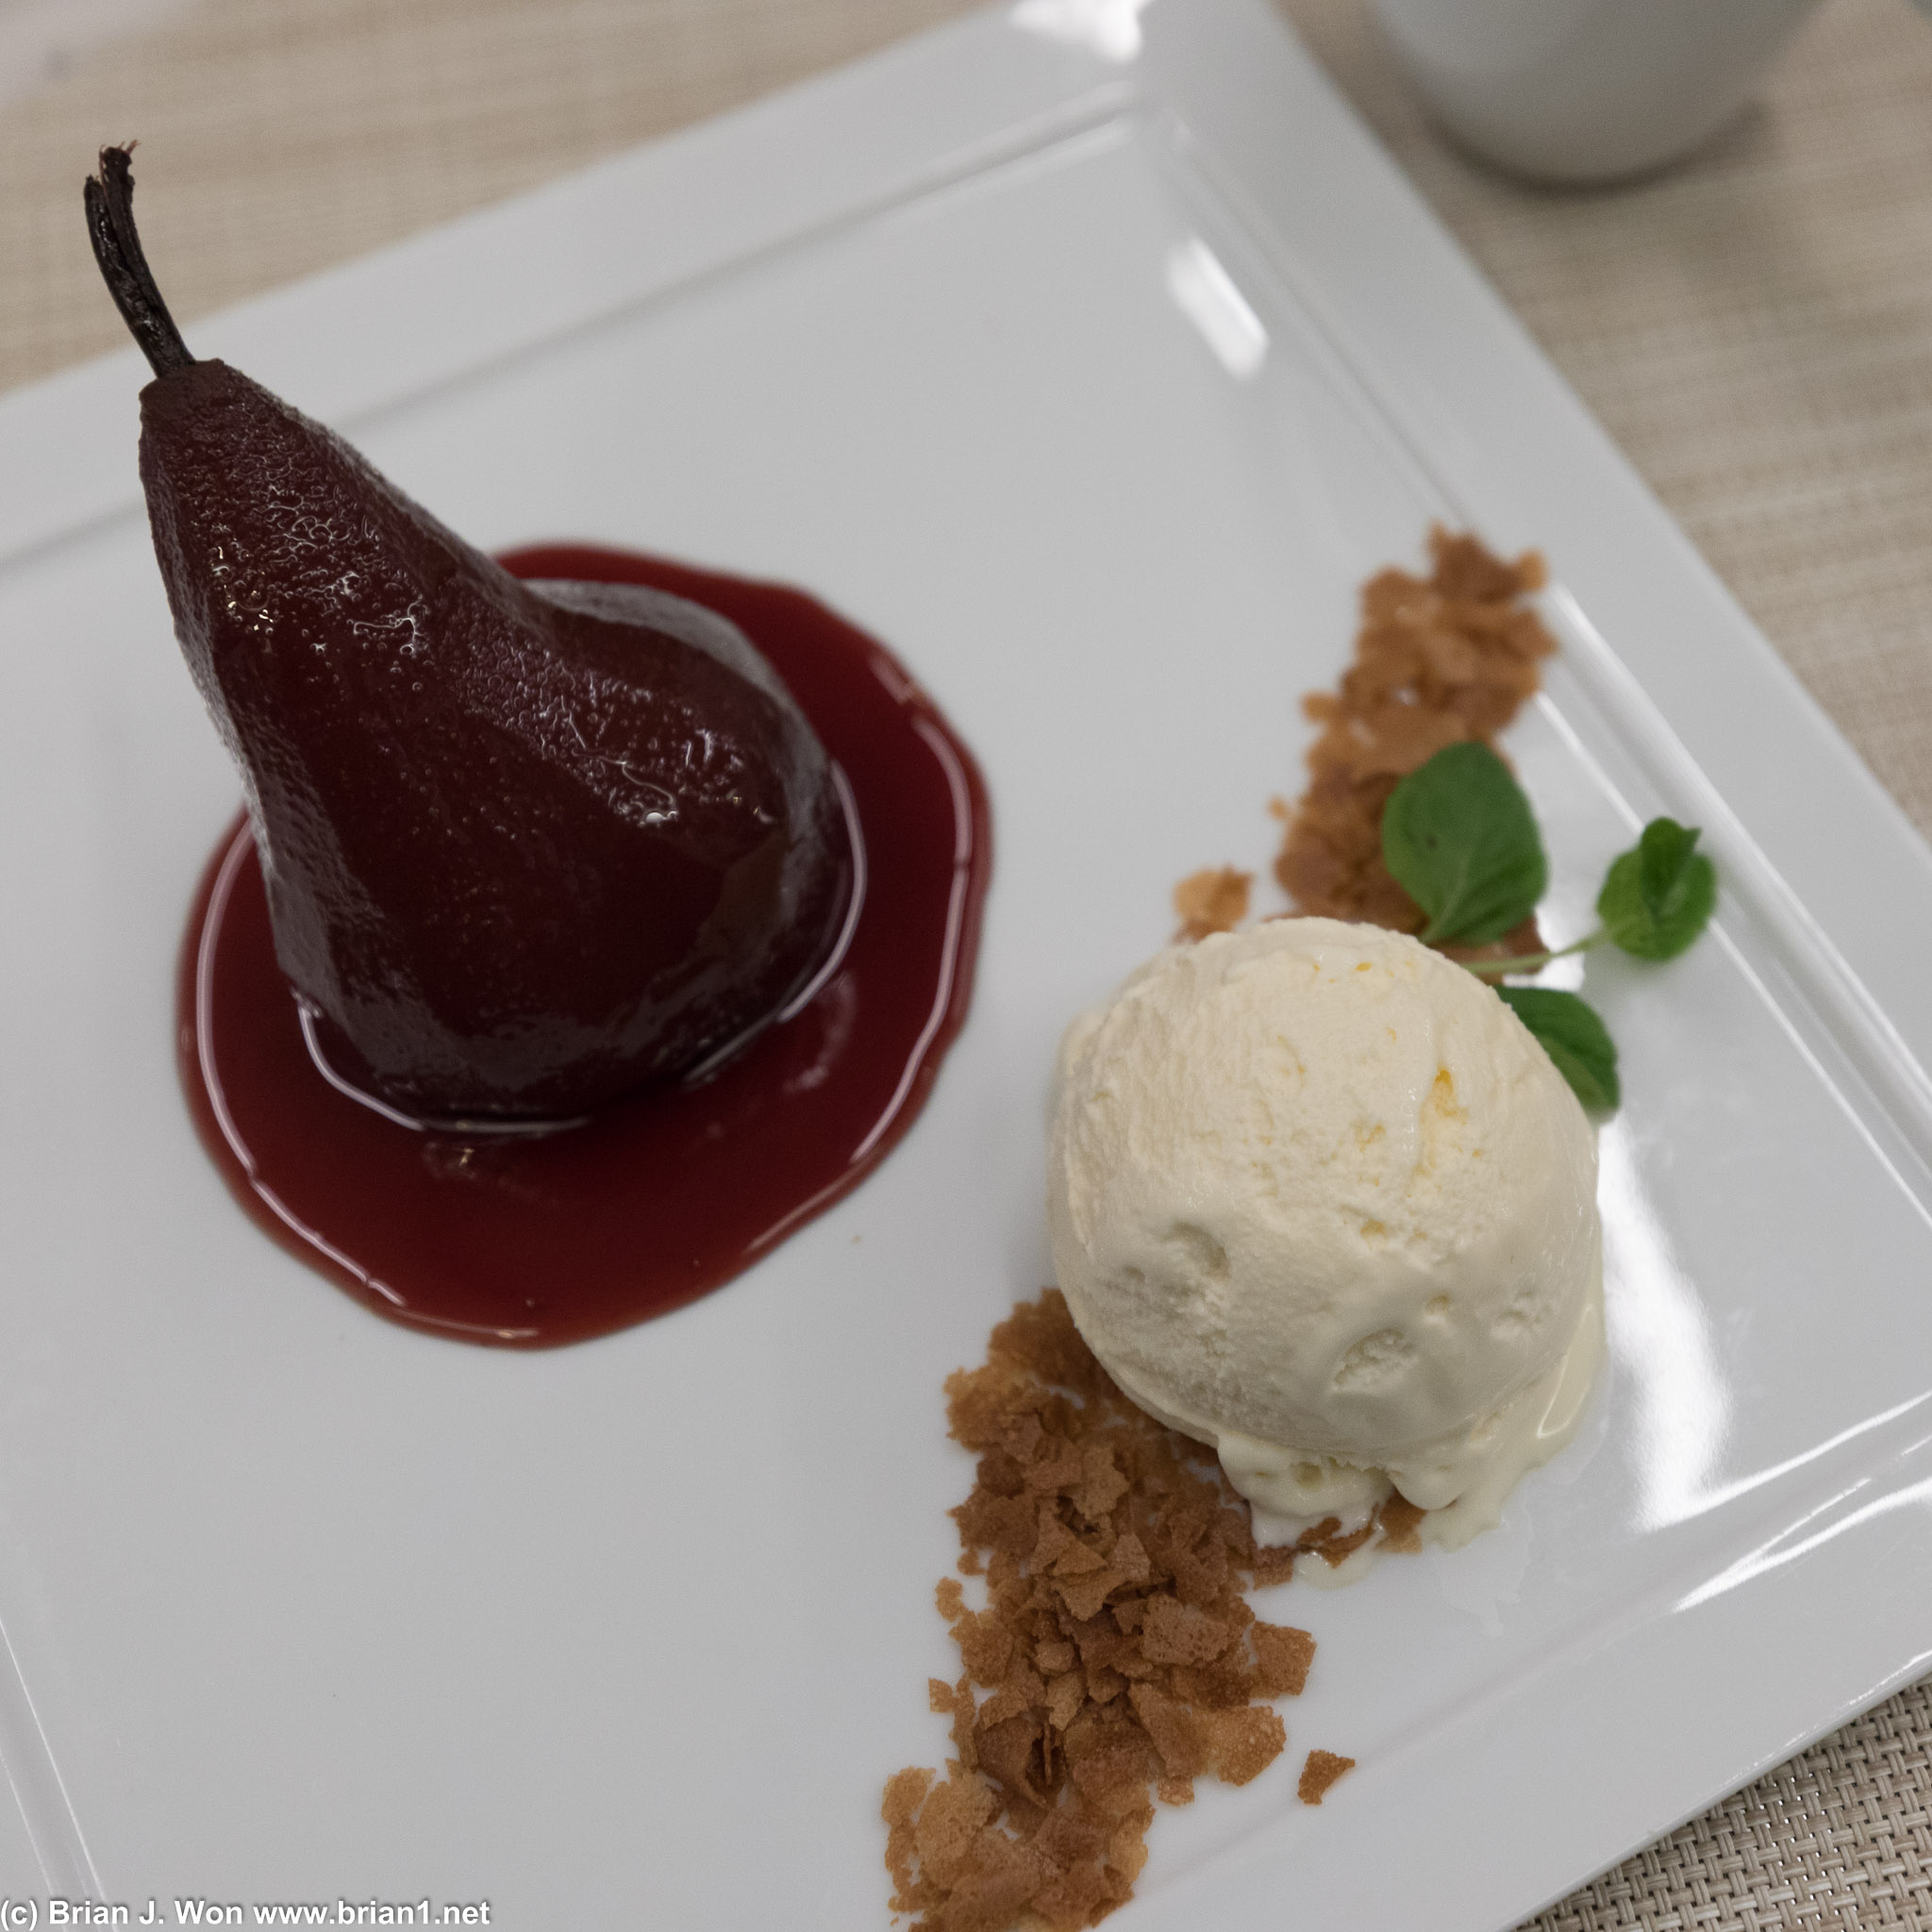 Poached pear was pretty good for an airport club.